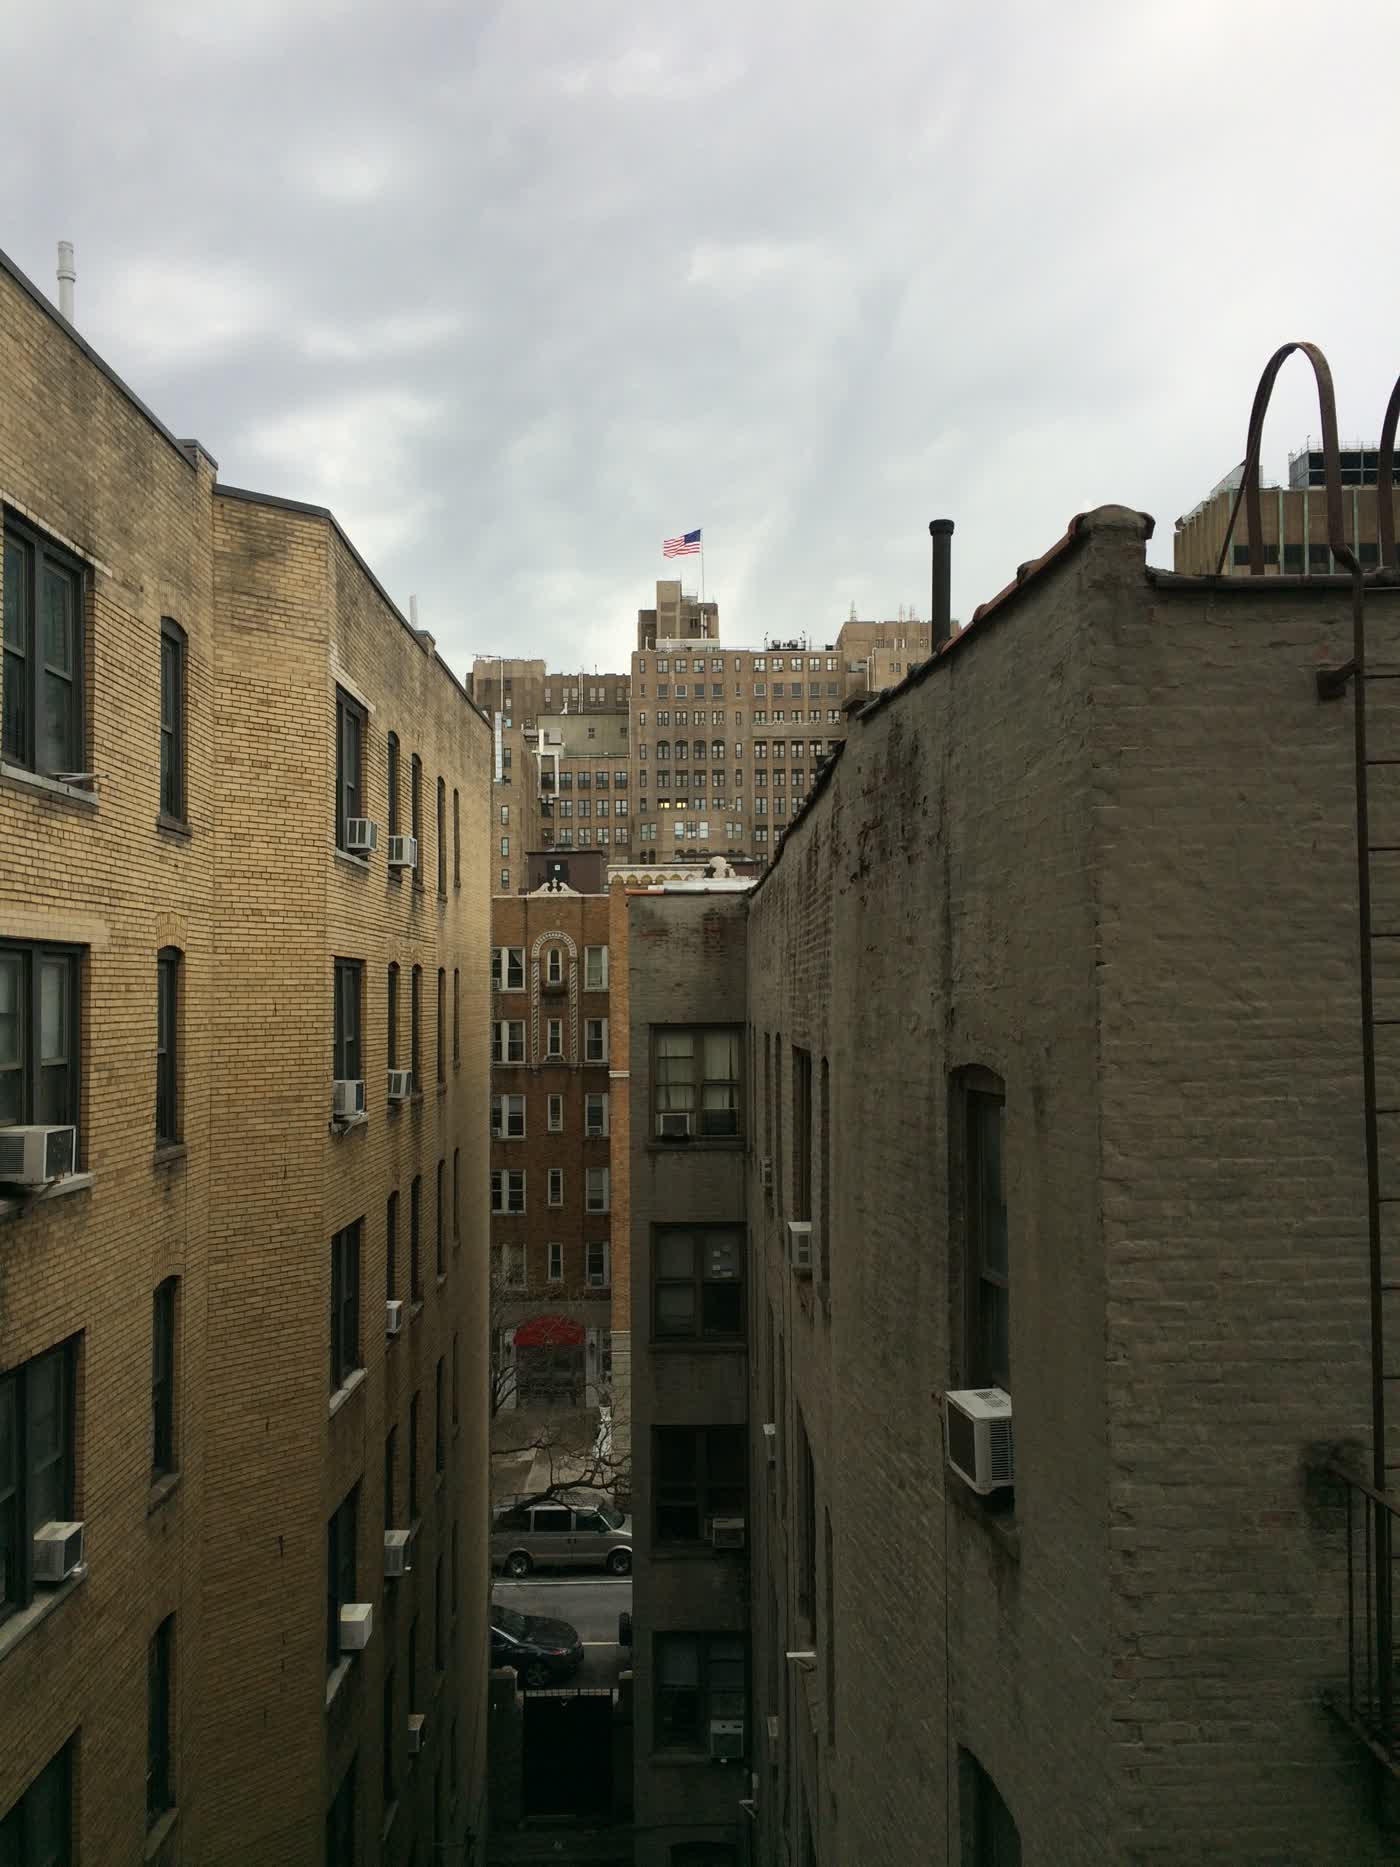 A corridor between buildings, culminating in a larger building with an American flag on top.